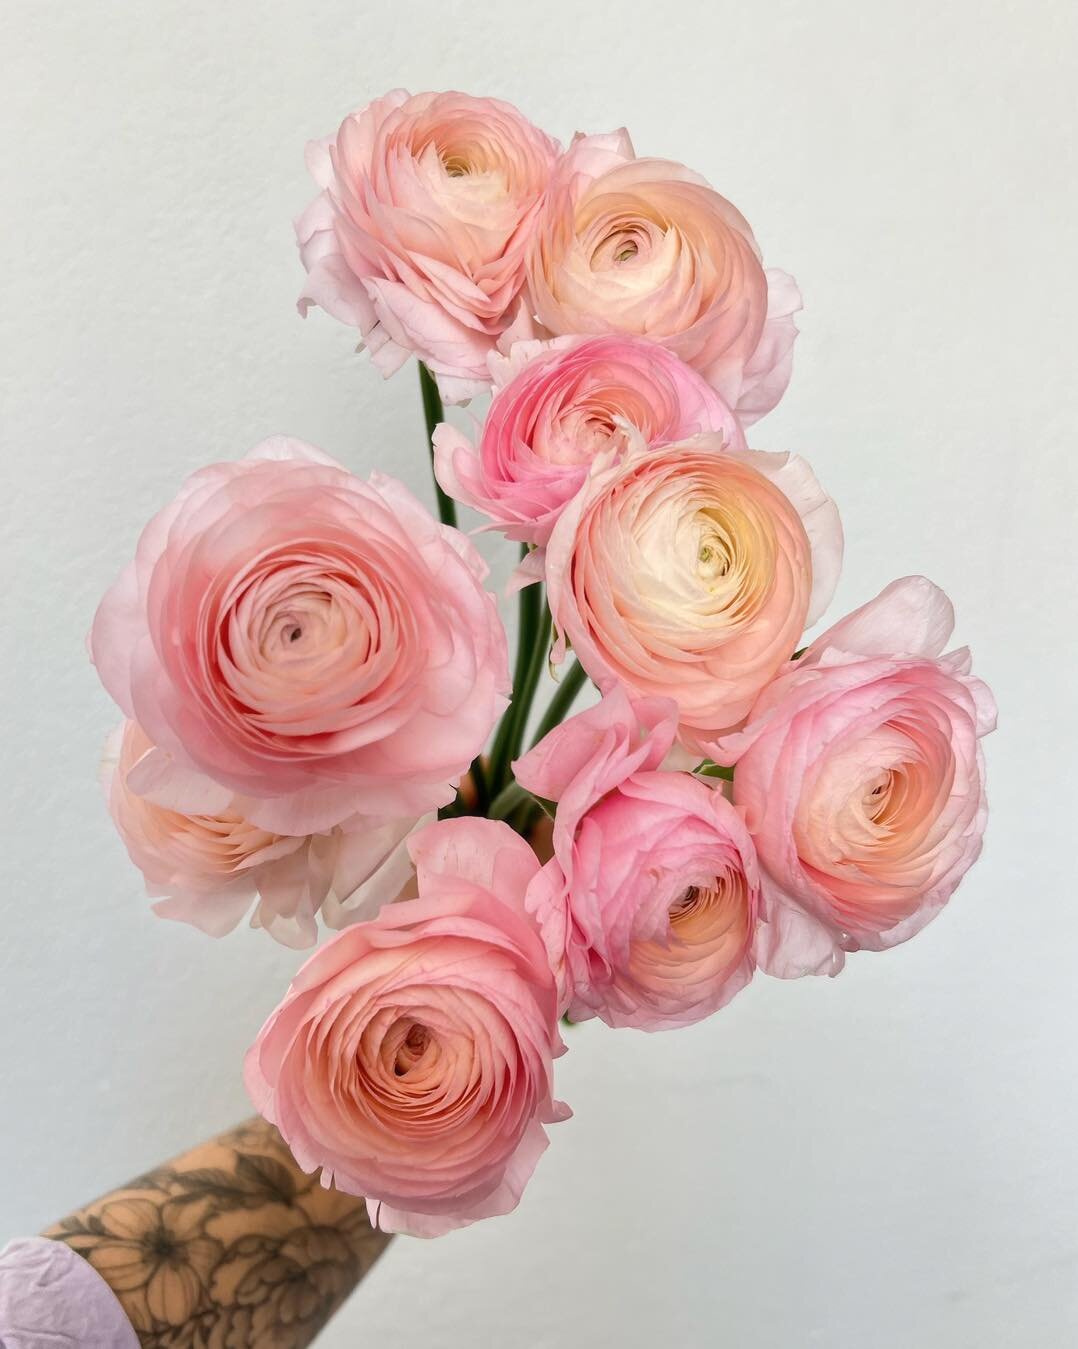 Happy Saturday! Lucy Blooms is currently creating flower magic for today&rsquo;s event ✨🌸 I hope these pastel, candy-colored ranunculus make your day brighter!
.
.
.
.
.
 #instabloom #flowersofinstagram 
 #lucyblooms  #ihavethisthingwithflowers #bou